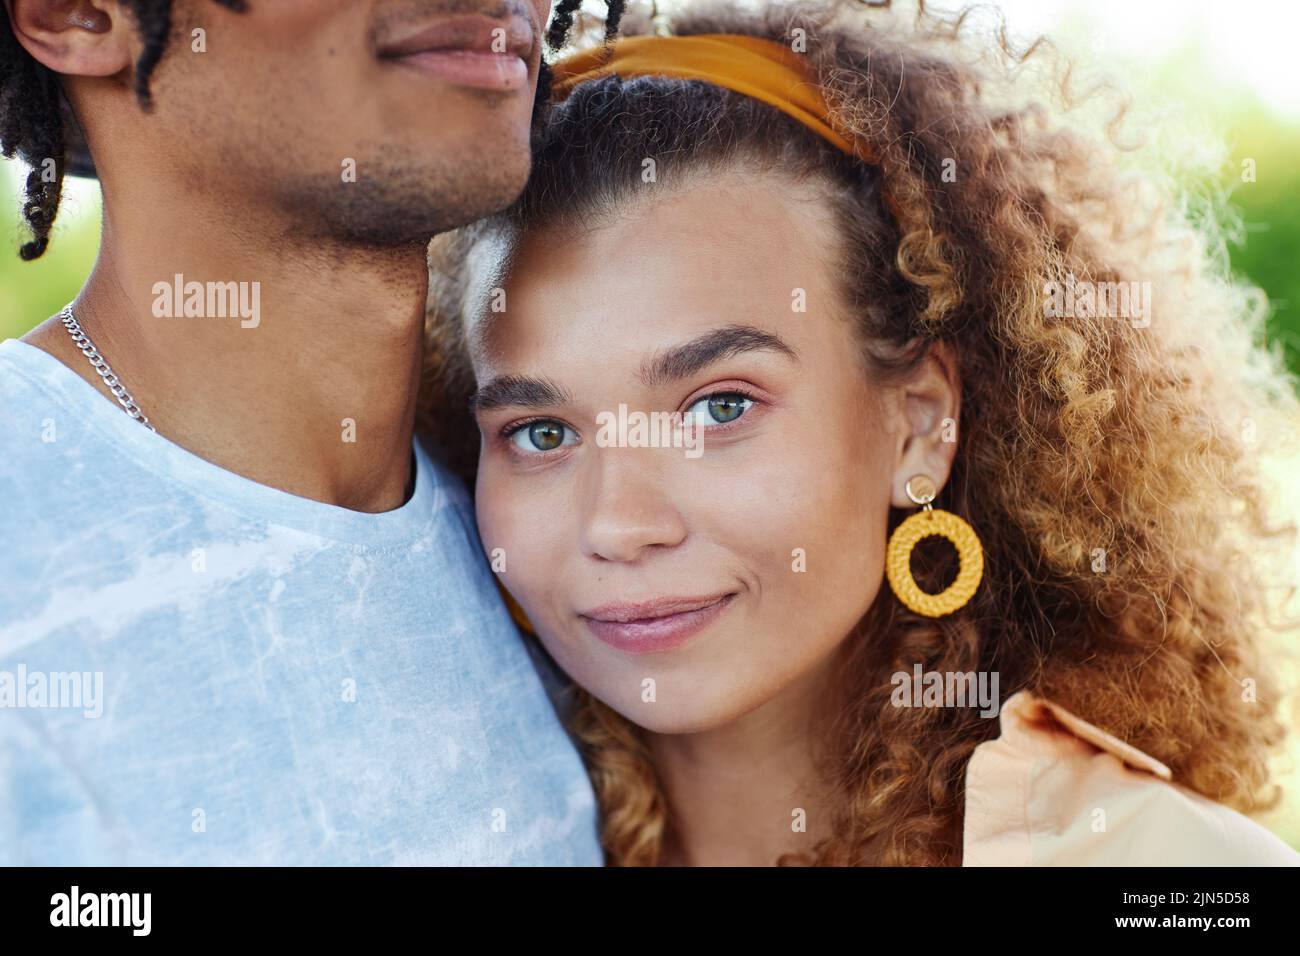 Close up portrait of curly hair young woman smiling at camera and embracing anonymous boyfriend during romantic date outdoors Stock Photo